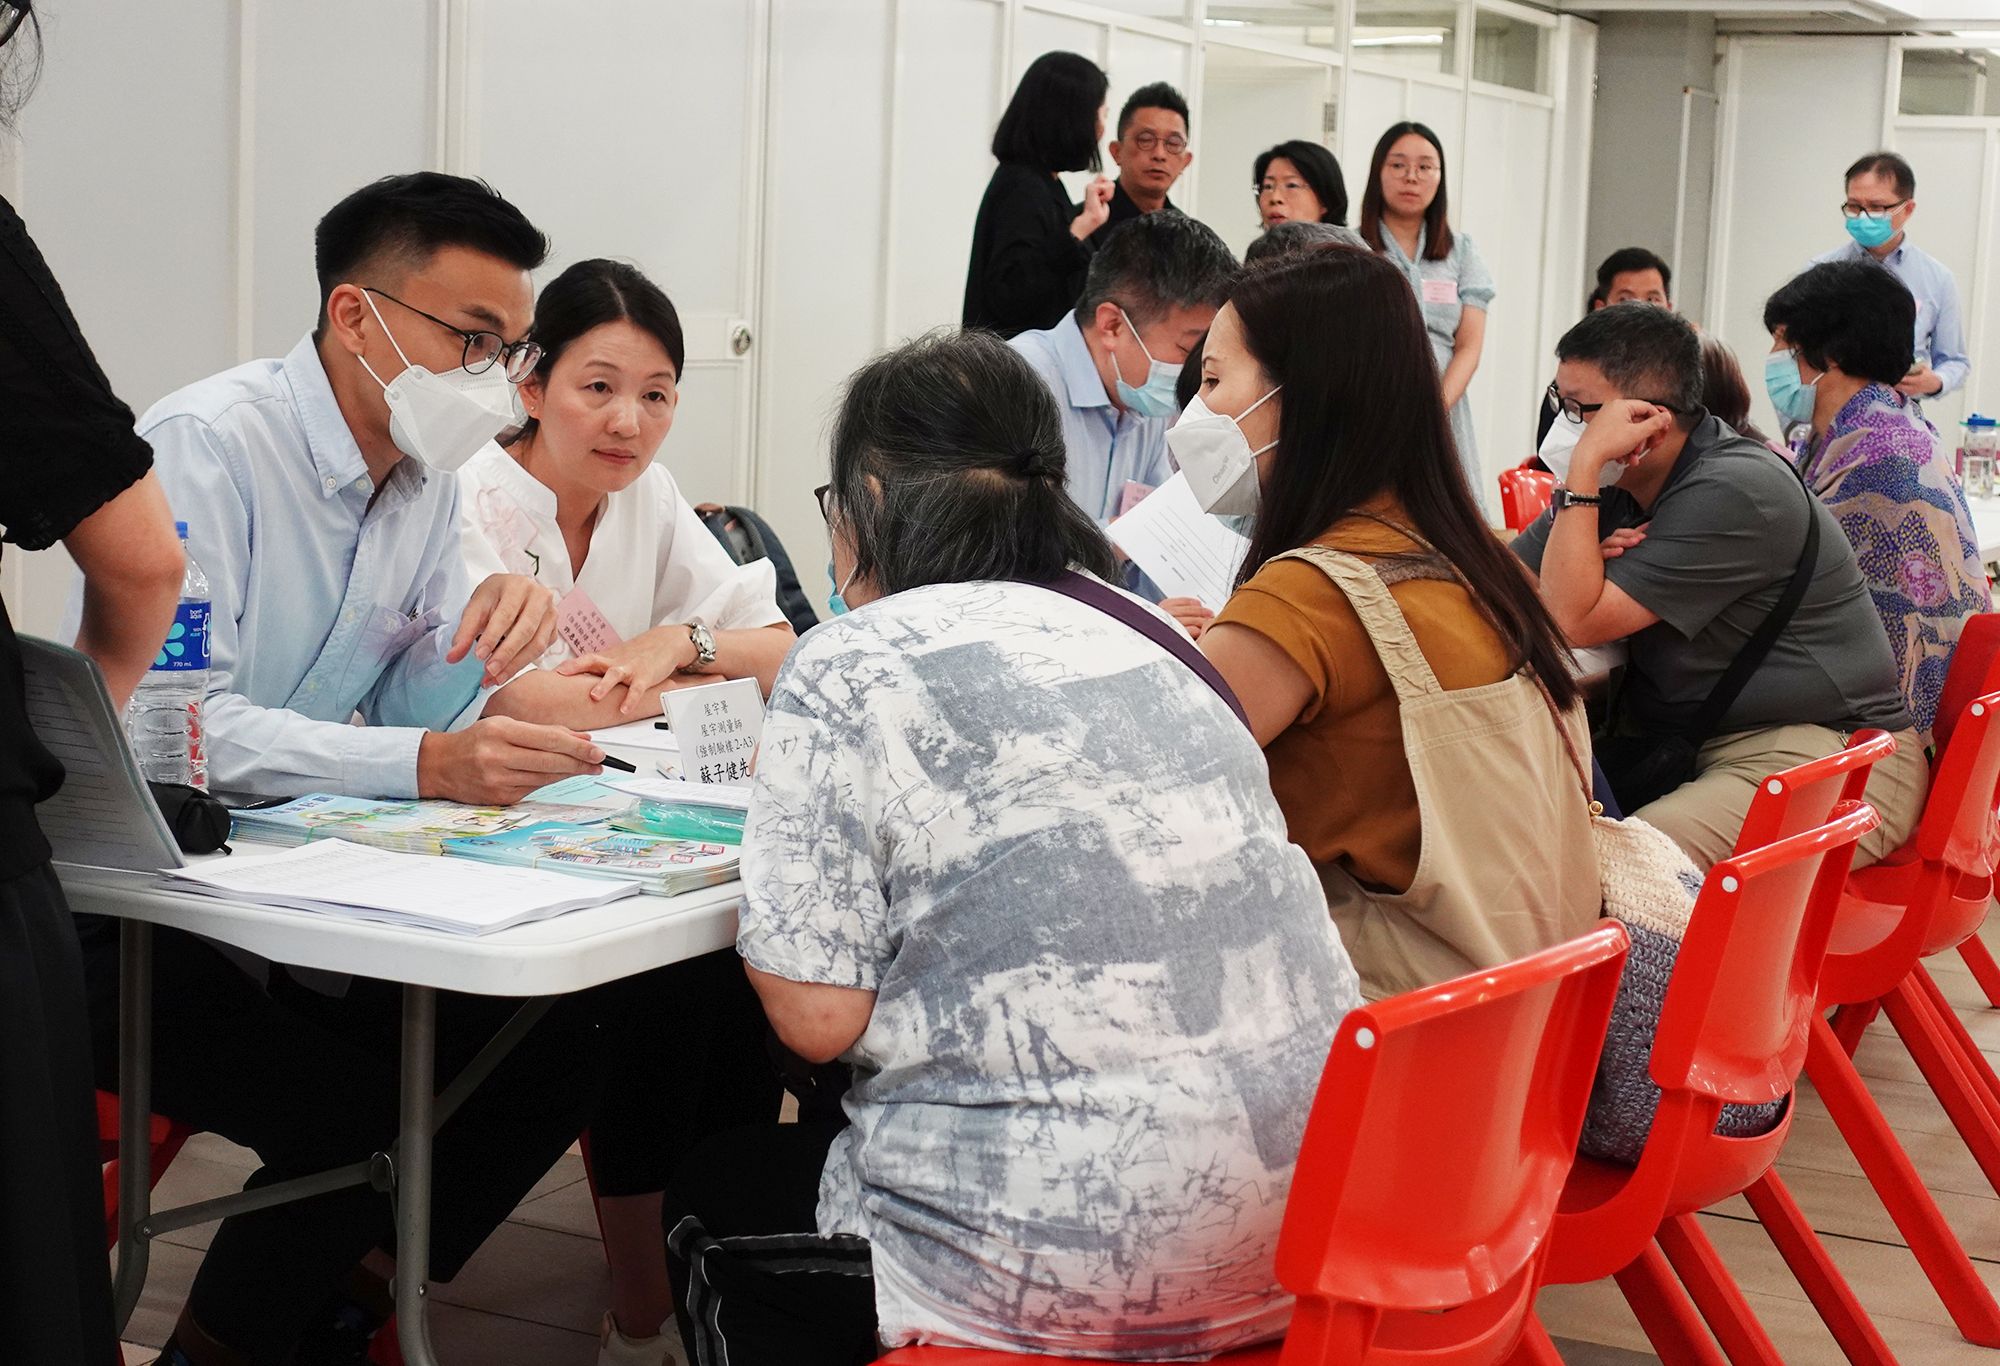 Earlier on, the BD, the URA and the HAD jointly organised district briefings in the Sham Shui Po, Kowloon City, Yau Tsim Mong and Central and Western districts to explain the procedures pertaining to compliance with MBIS notices, formation of OCs and application for subsidies from the URA.  Pictured is the district briefing held in the Sham Shui Po district.